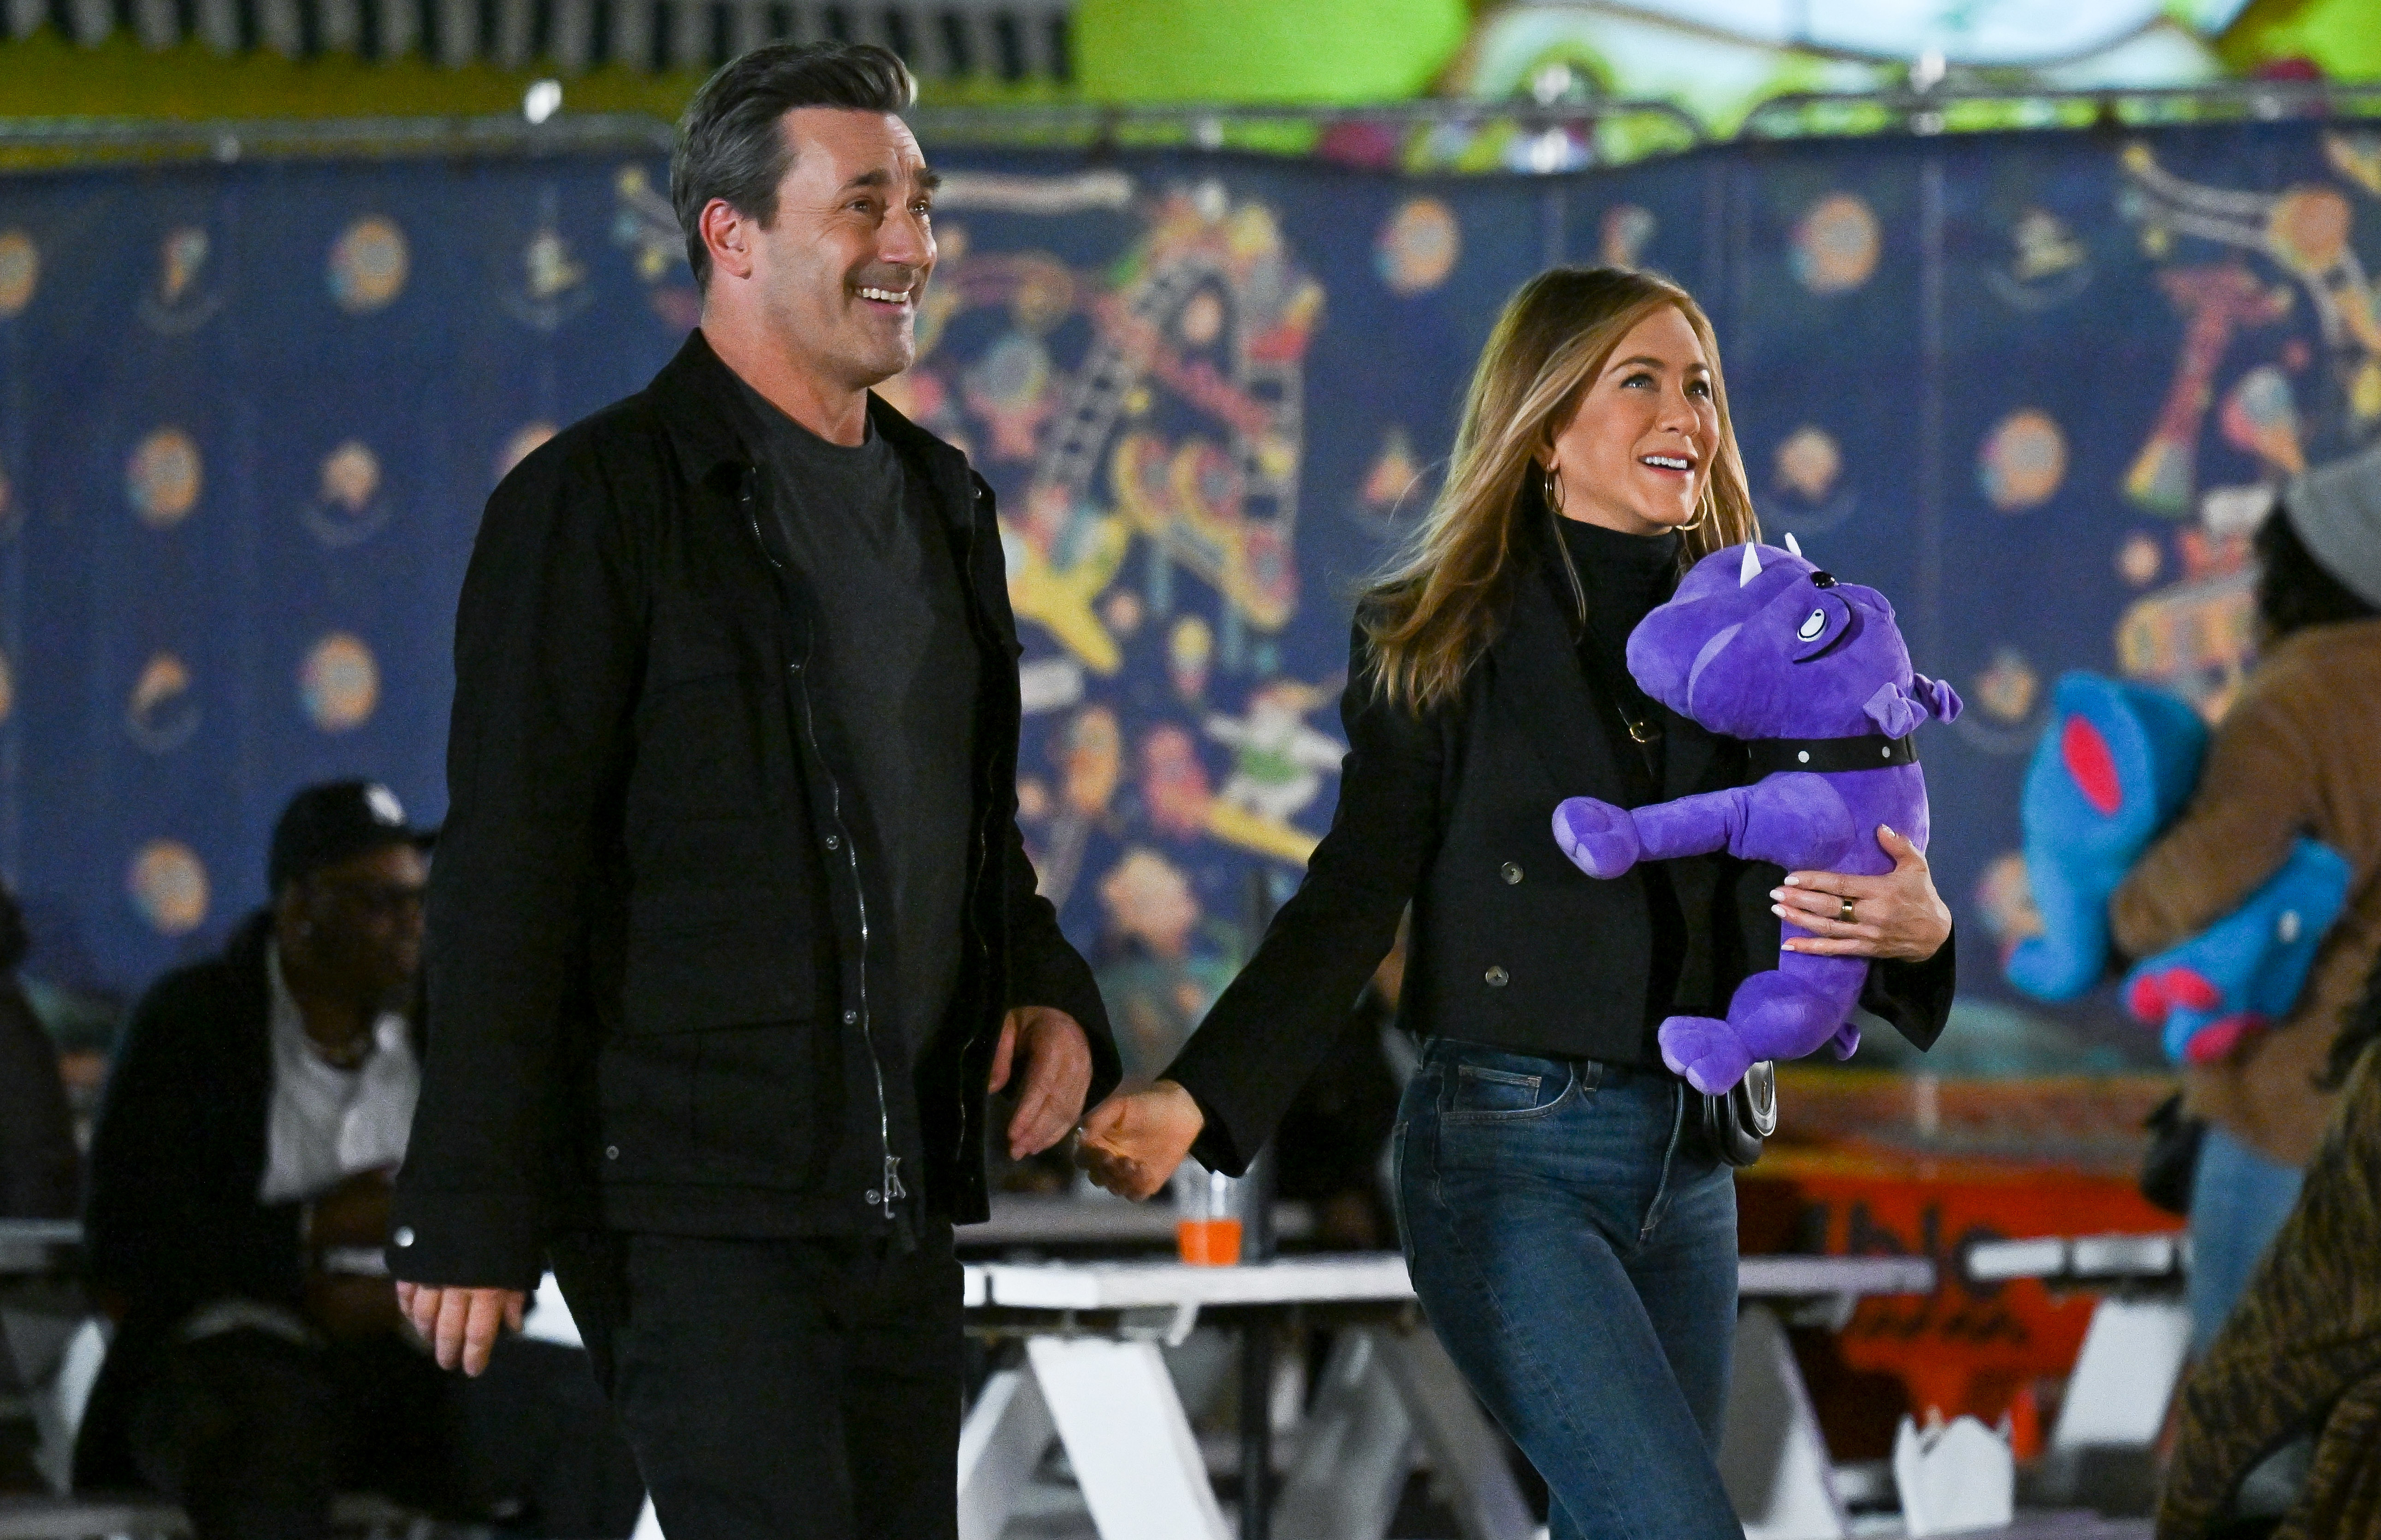 Jon Hamm and Jennifer Aniston smile while walking together at an outdoor fair. Jennifer holds a stuffed animal